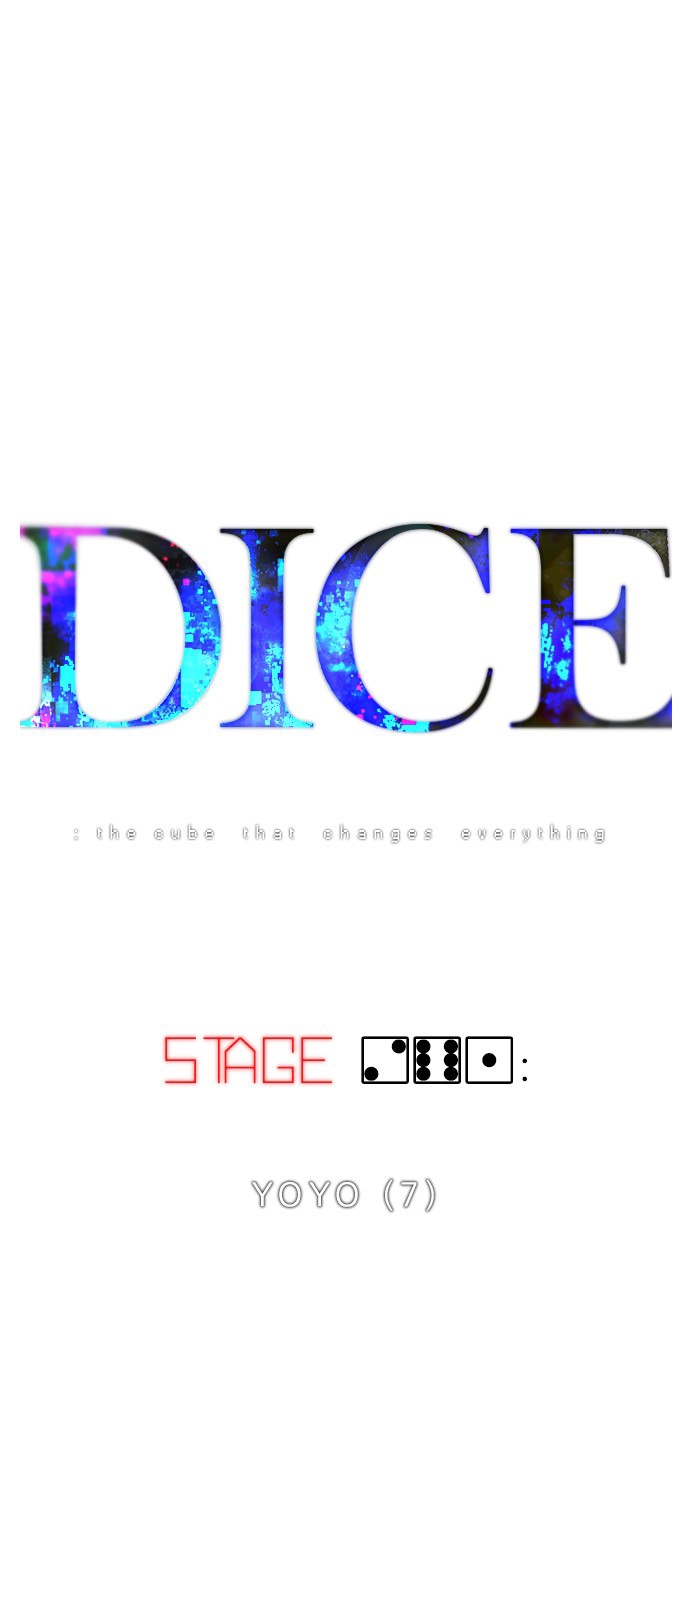 DICE: The Cube that Changes Everything Ch. 261 YOYO (7)